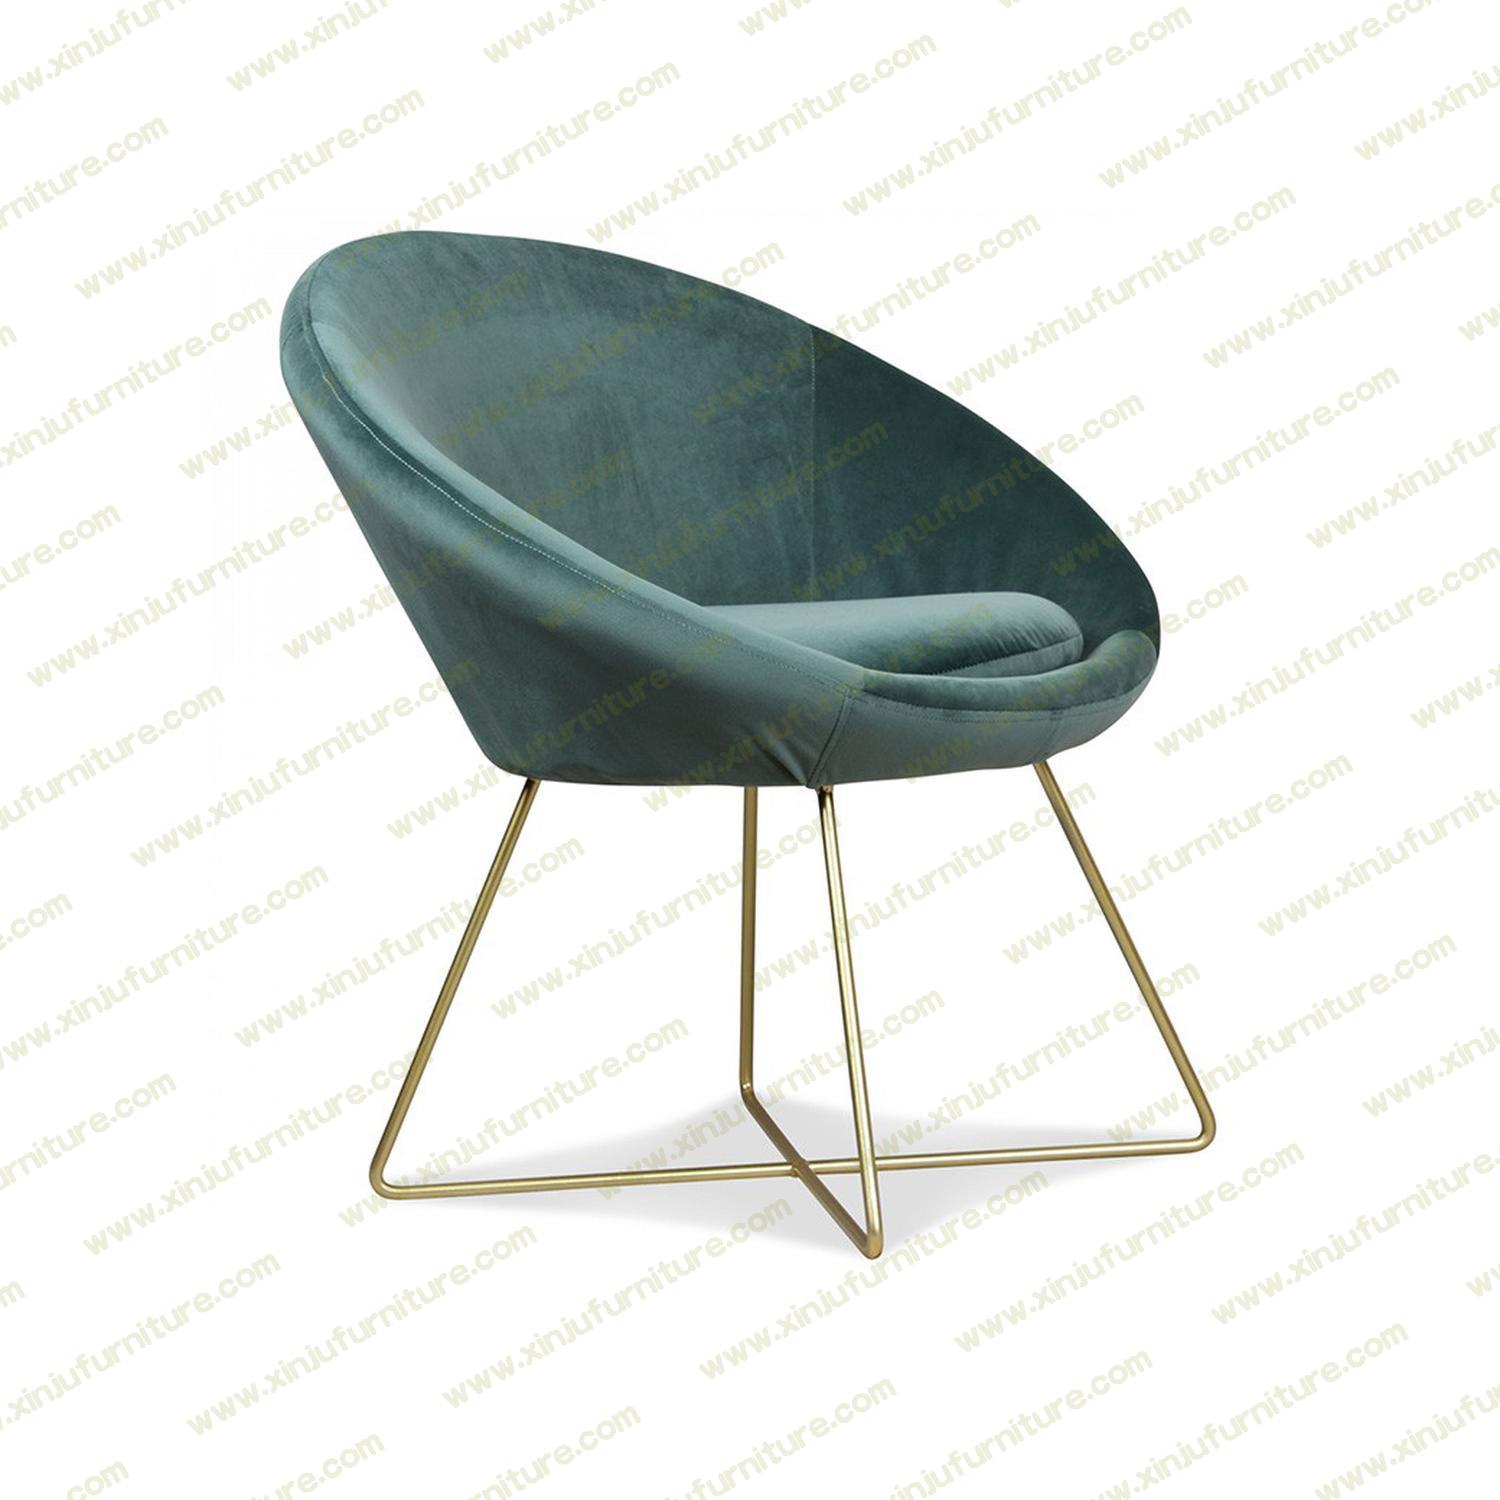 Round tufted comfortable household chair back